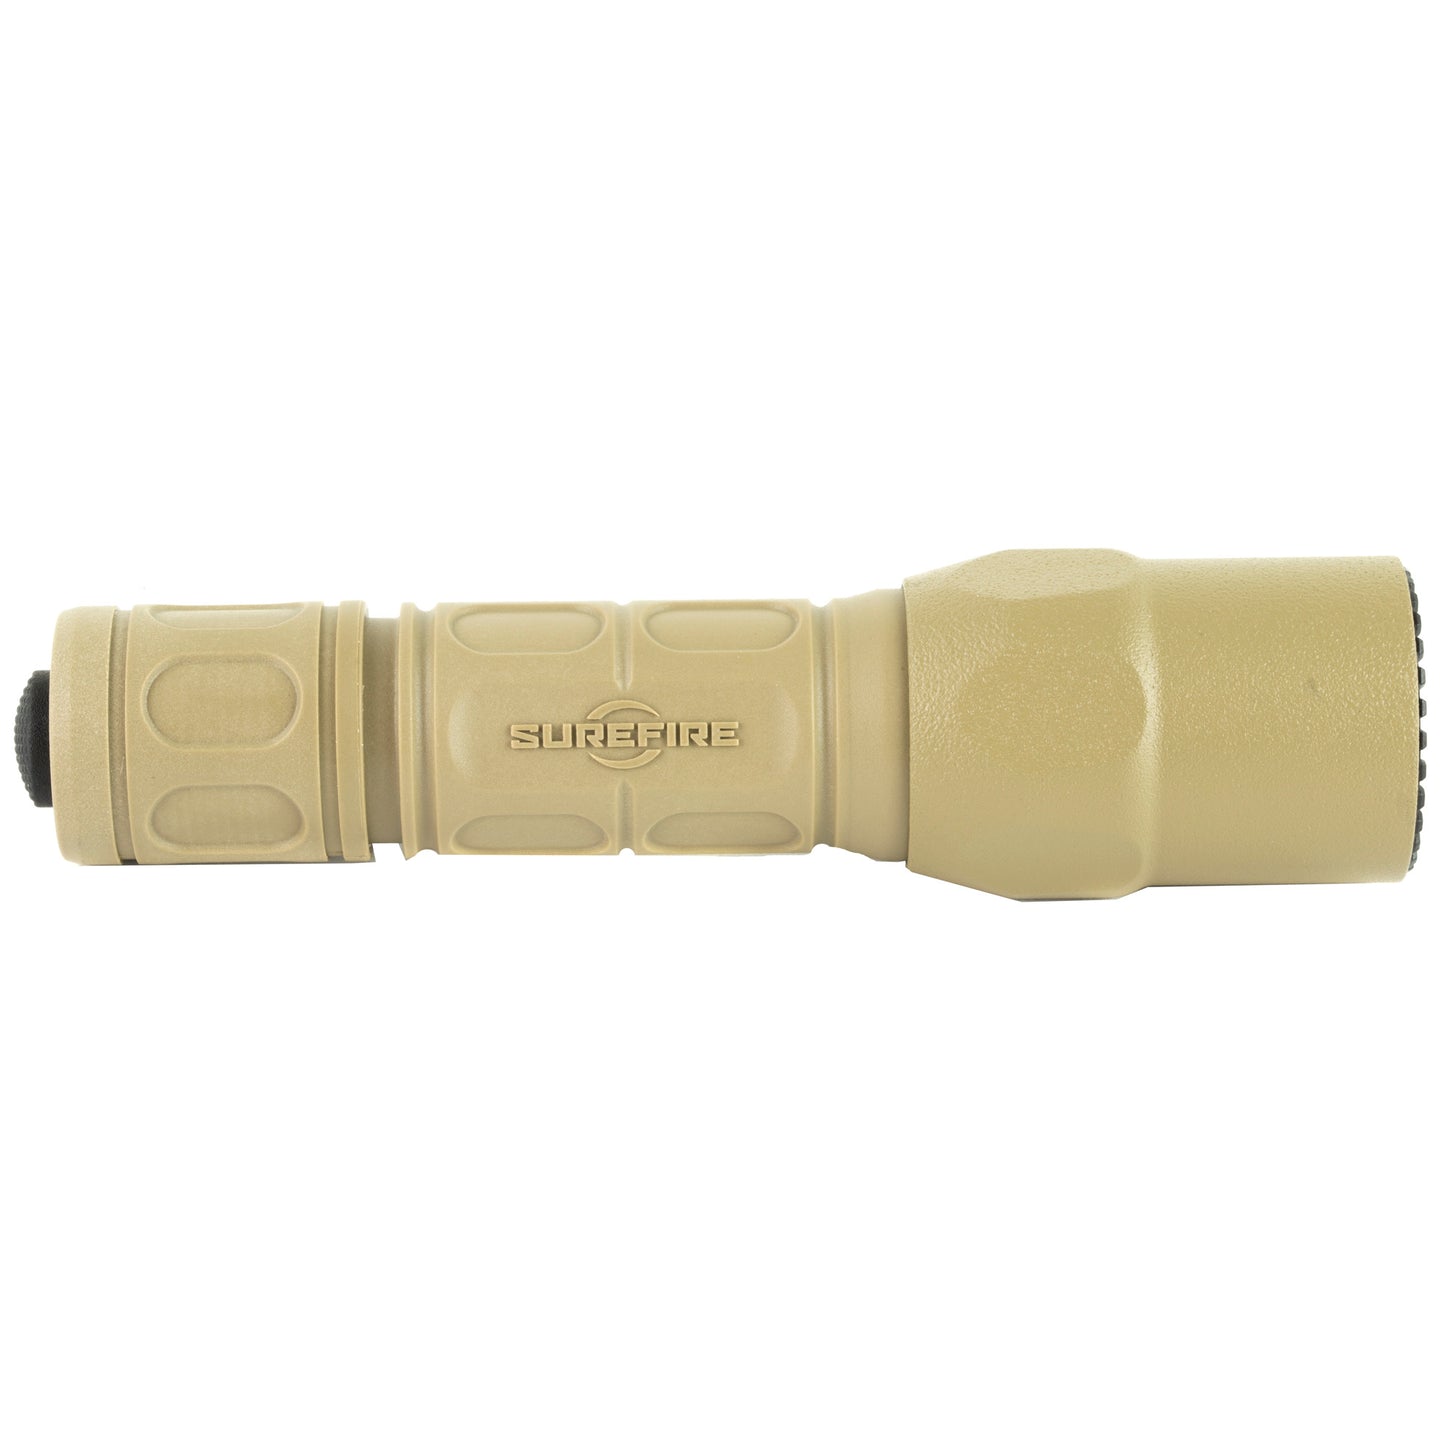 Surefire, G2X Pro Flashlight, Dual-Output LED, 15/600 Lumens, Constant-On Click-Type Tailcap Switch, Tan